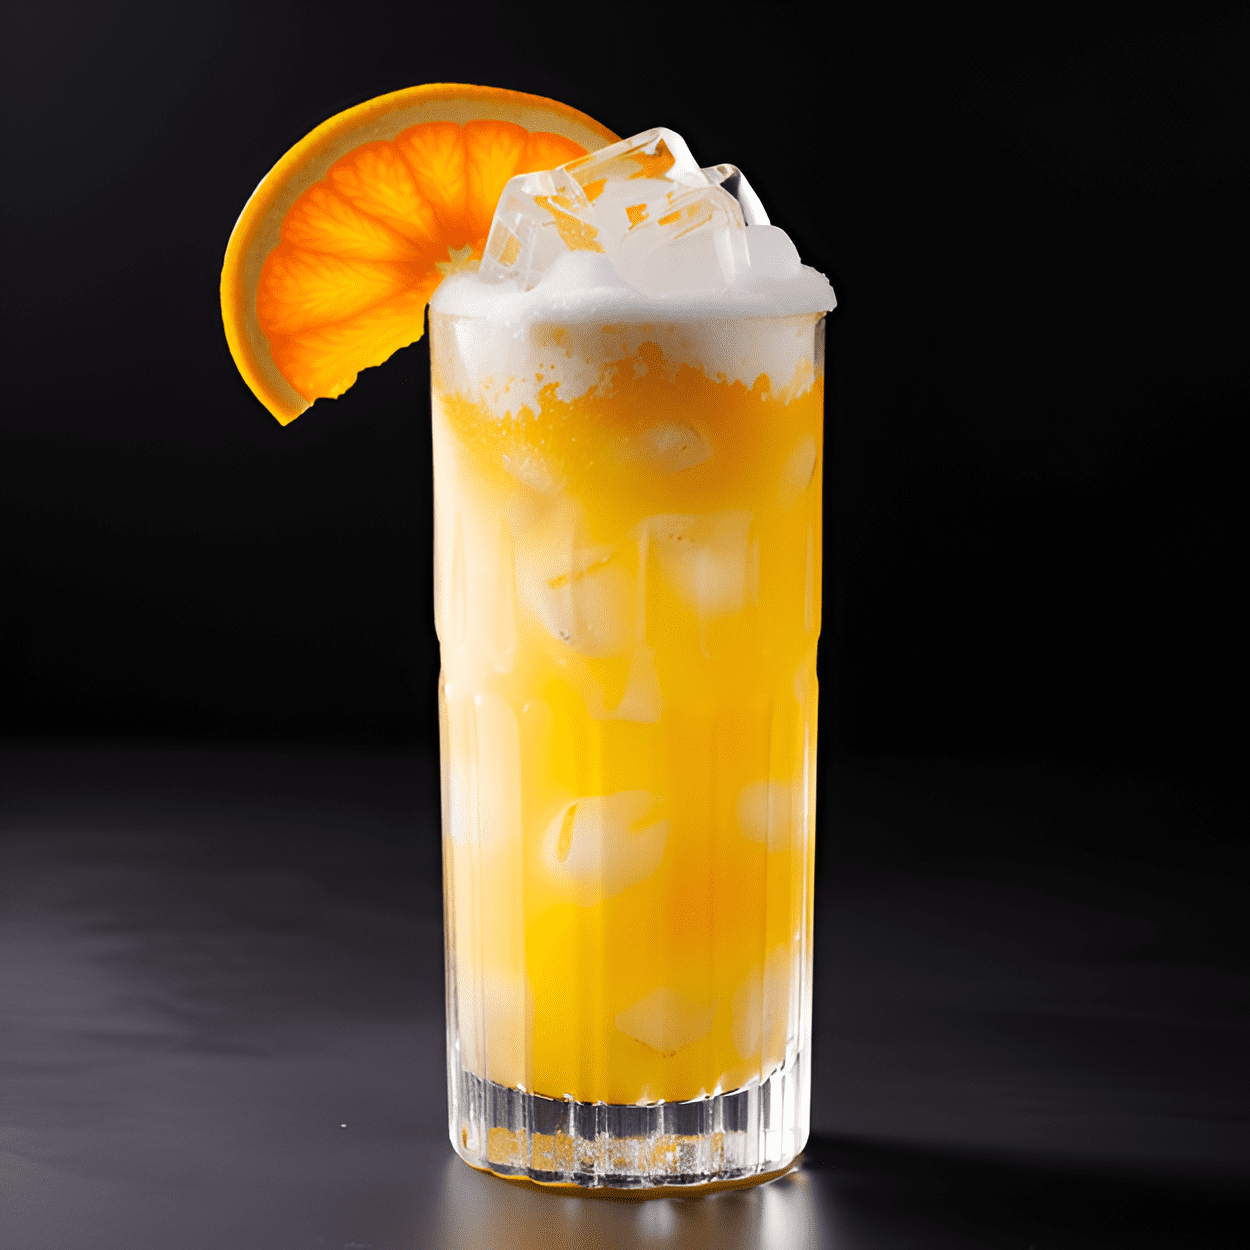 Morir Soñando Drink Recipe - Morir Soñando has a creamy, sweet, and slightly tangy taste. The sweetness of the milk perfectly balances the acidity of the orange juice, creating a refreshing and delightful cocktail.